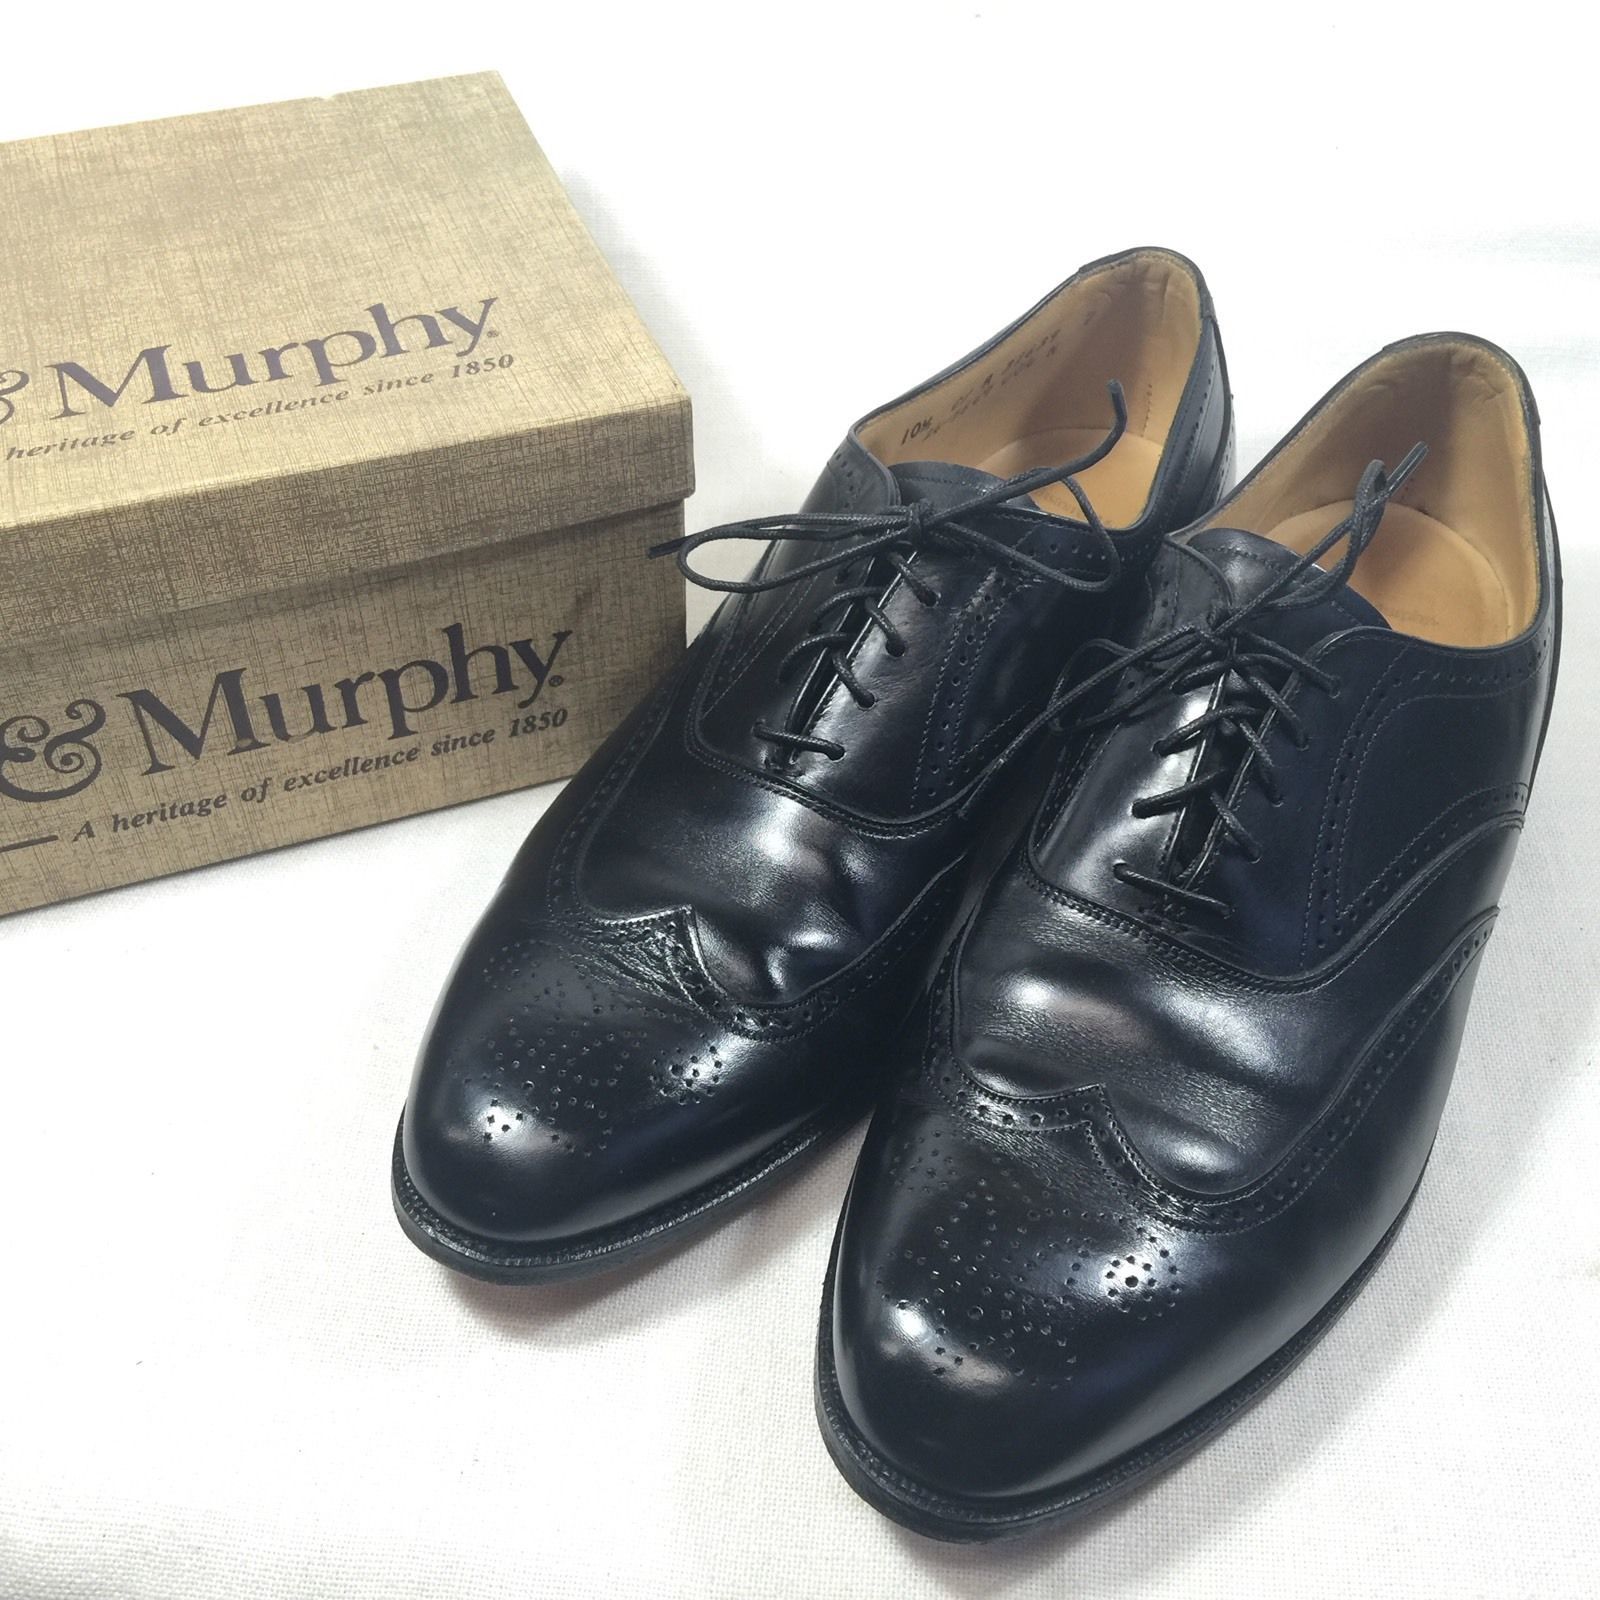 How To Date Old Johnston & Murphy Aristocrafts - Shoes